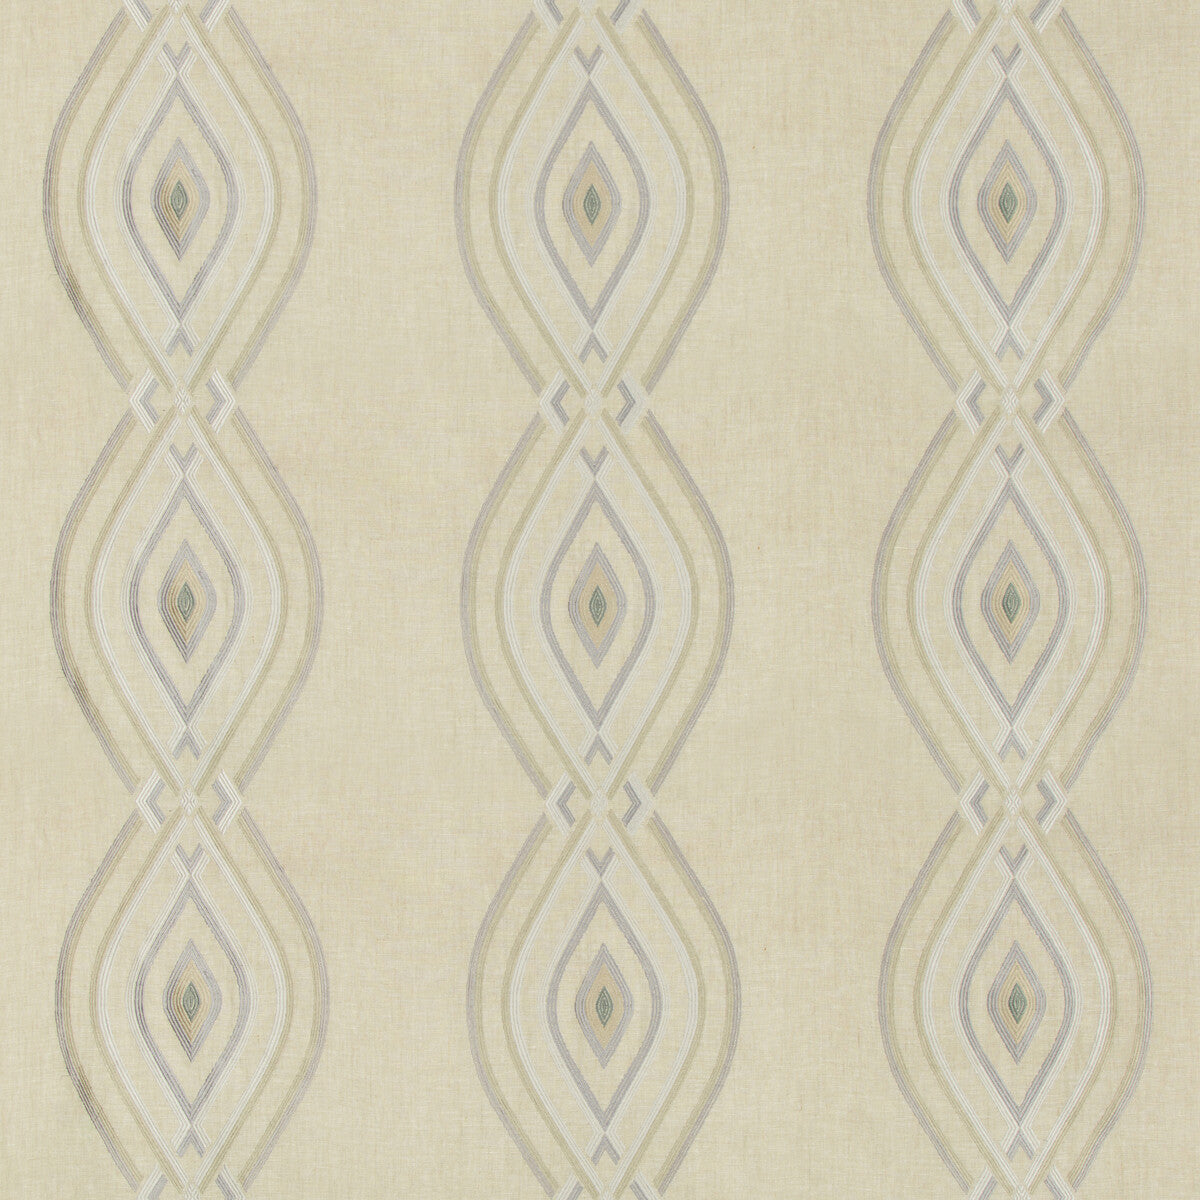 Ora Embroidery fabric in bluff color - pattern 2017172.111.0 - by Lee Jofa in the Westport collection